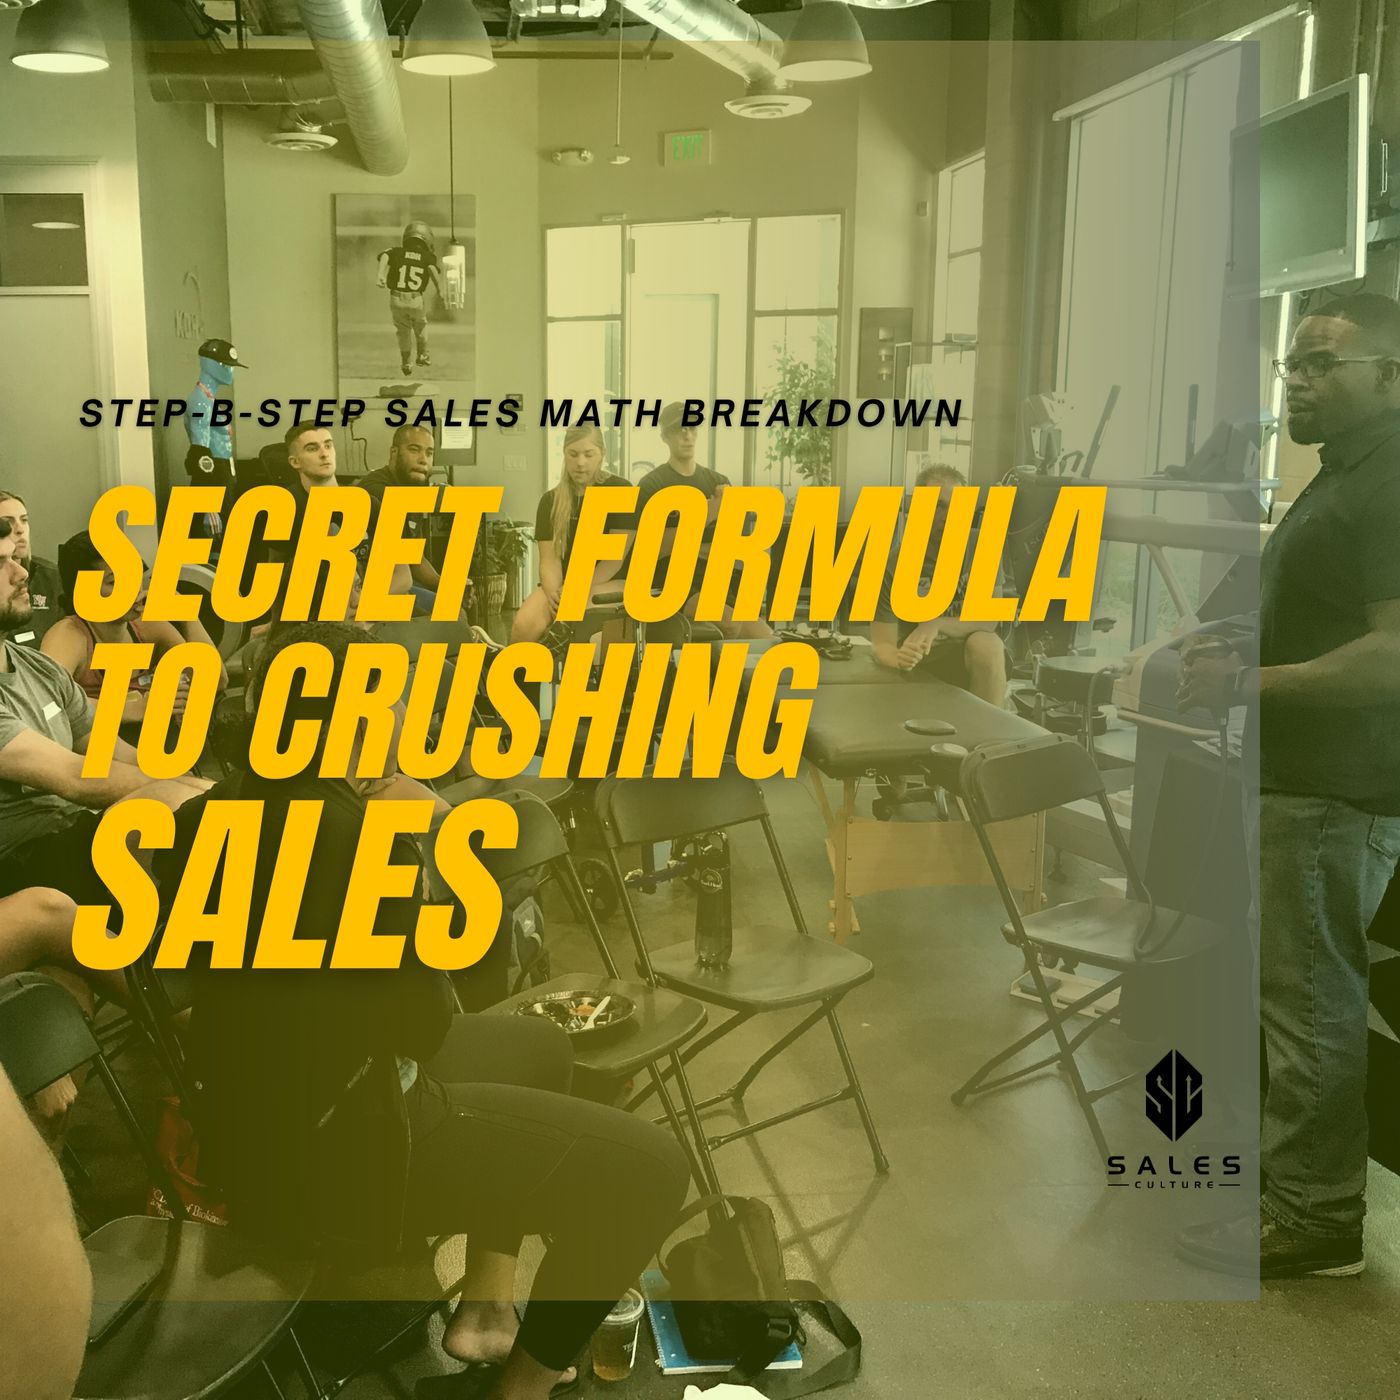 114. Secret Formula to crushing sales targets | $400k and counting Image